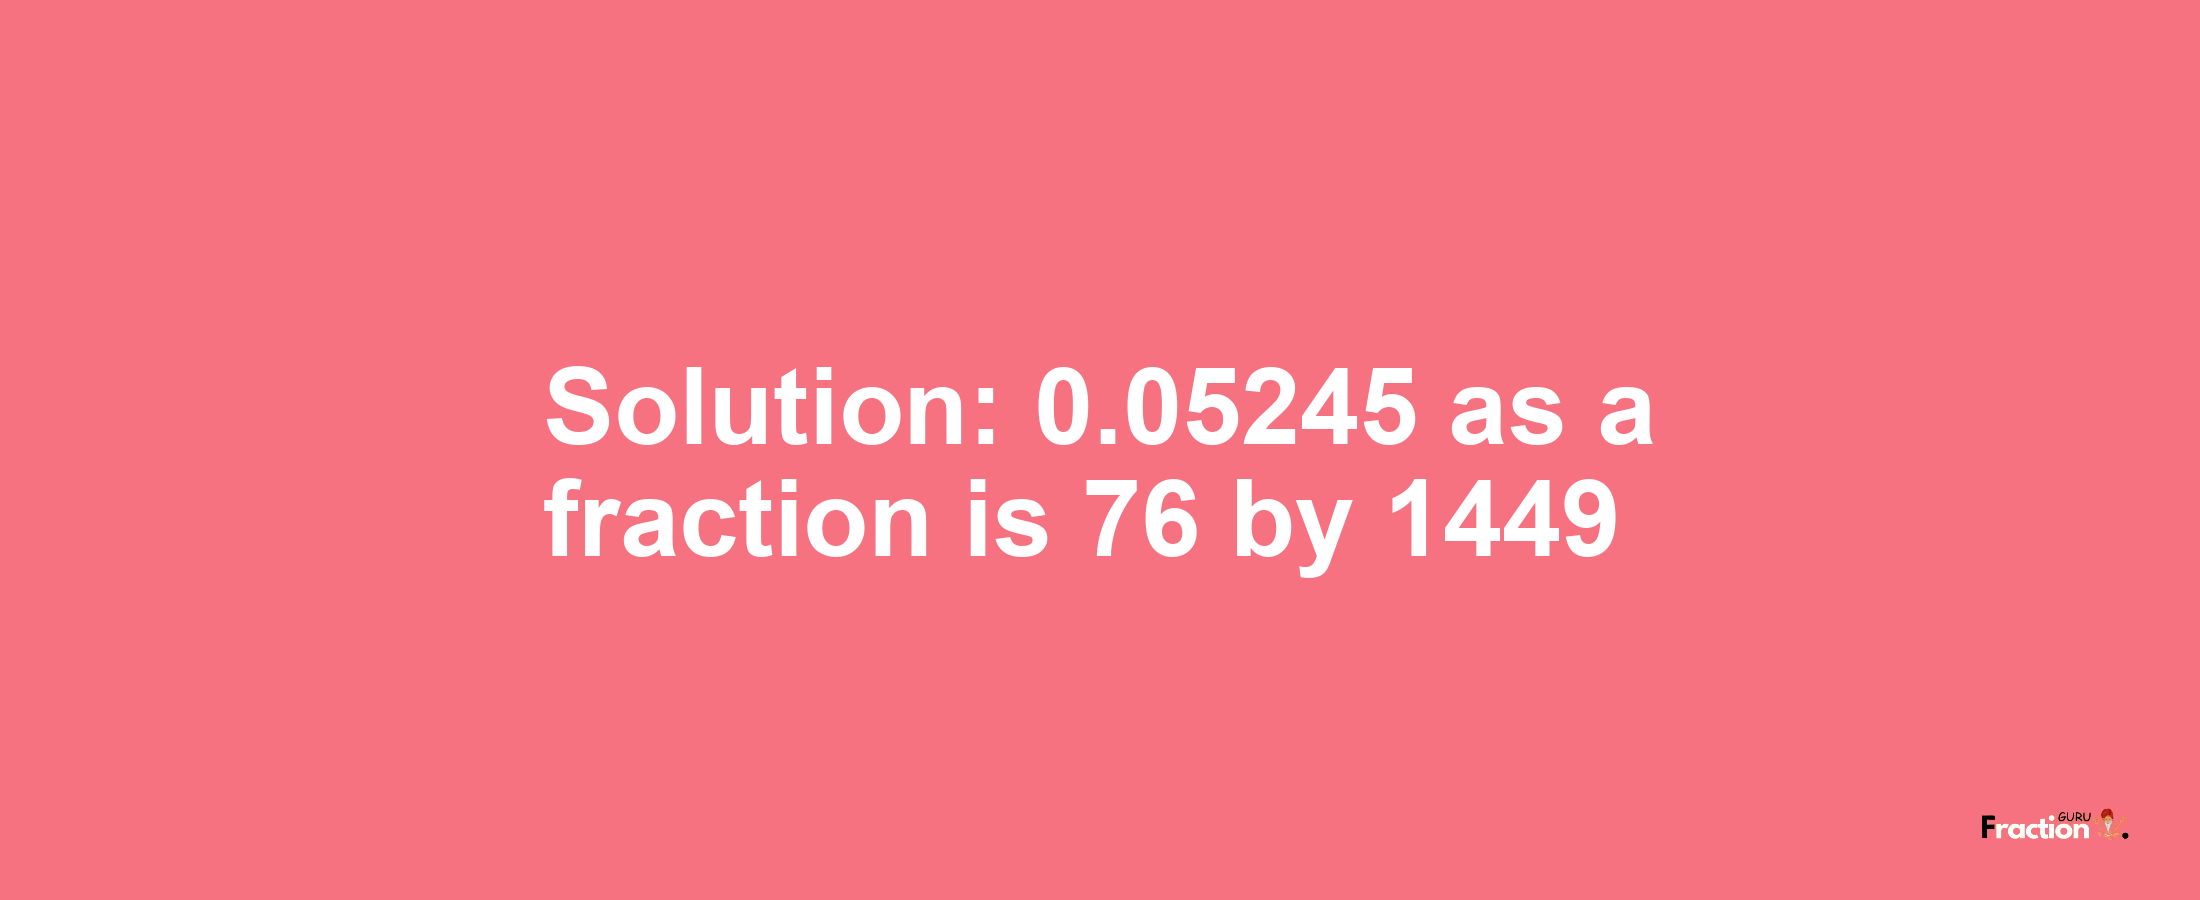 Solution:0.05245 as a fraction is 76/1449